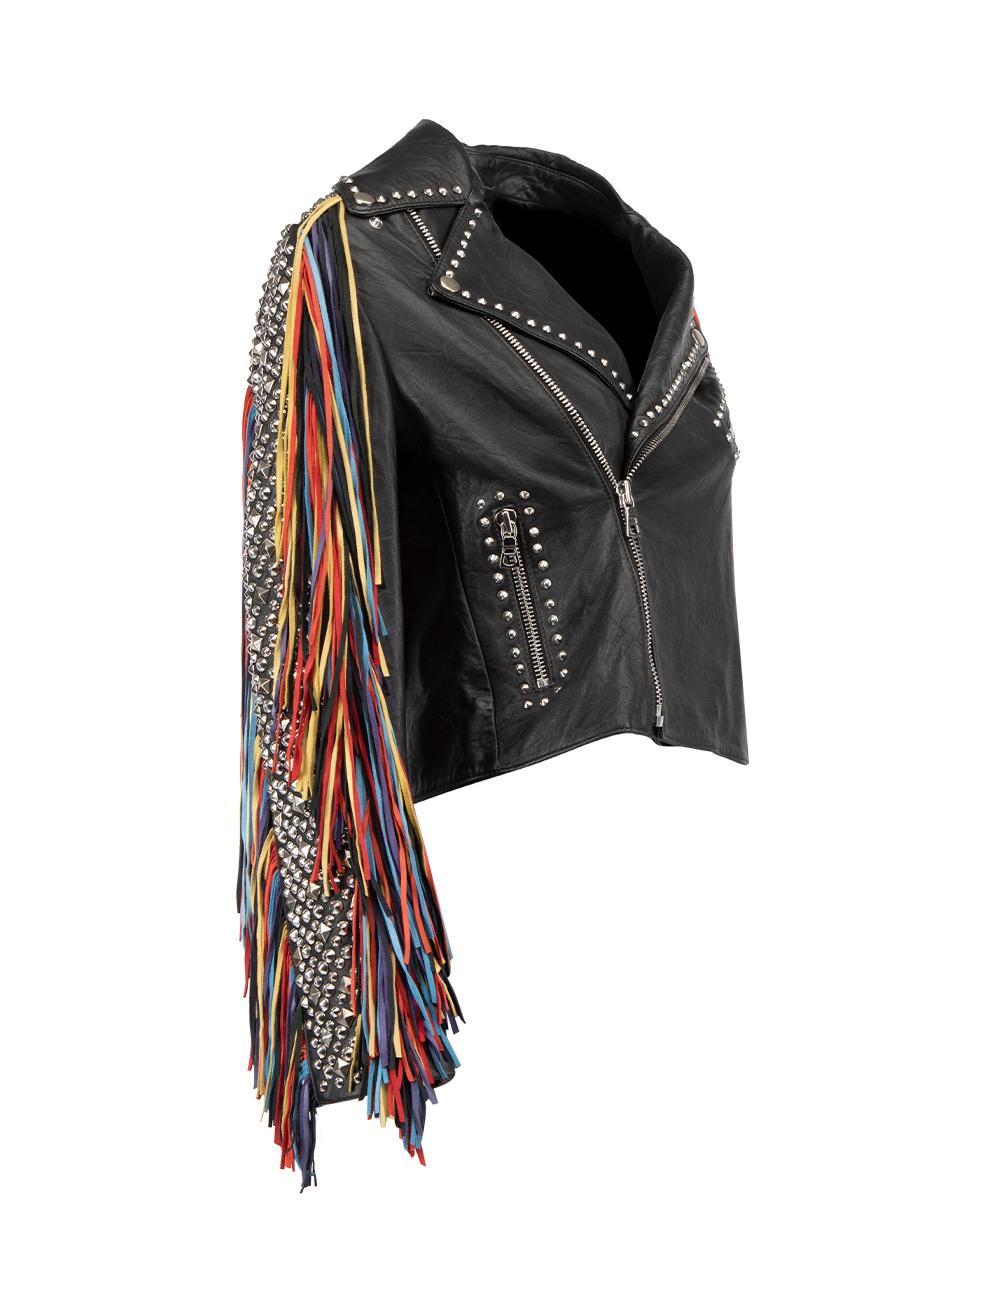 CONDITION is Very good. Minimal wear to jacket is evident. Minimal wear to suede fringe detail which looks slightly faded/worn on this used Alice+Olivia designer resale item. Details Black and multicolour Leather Jacket Biker cropped jacket Silver